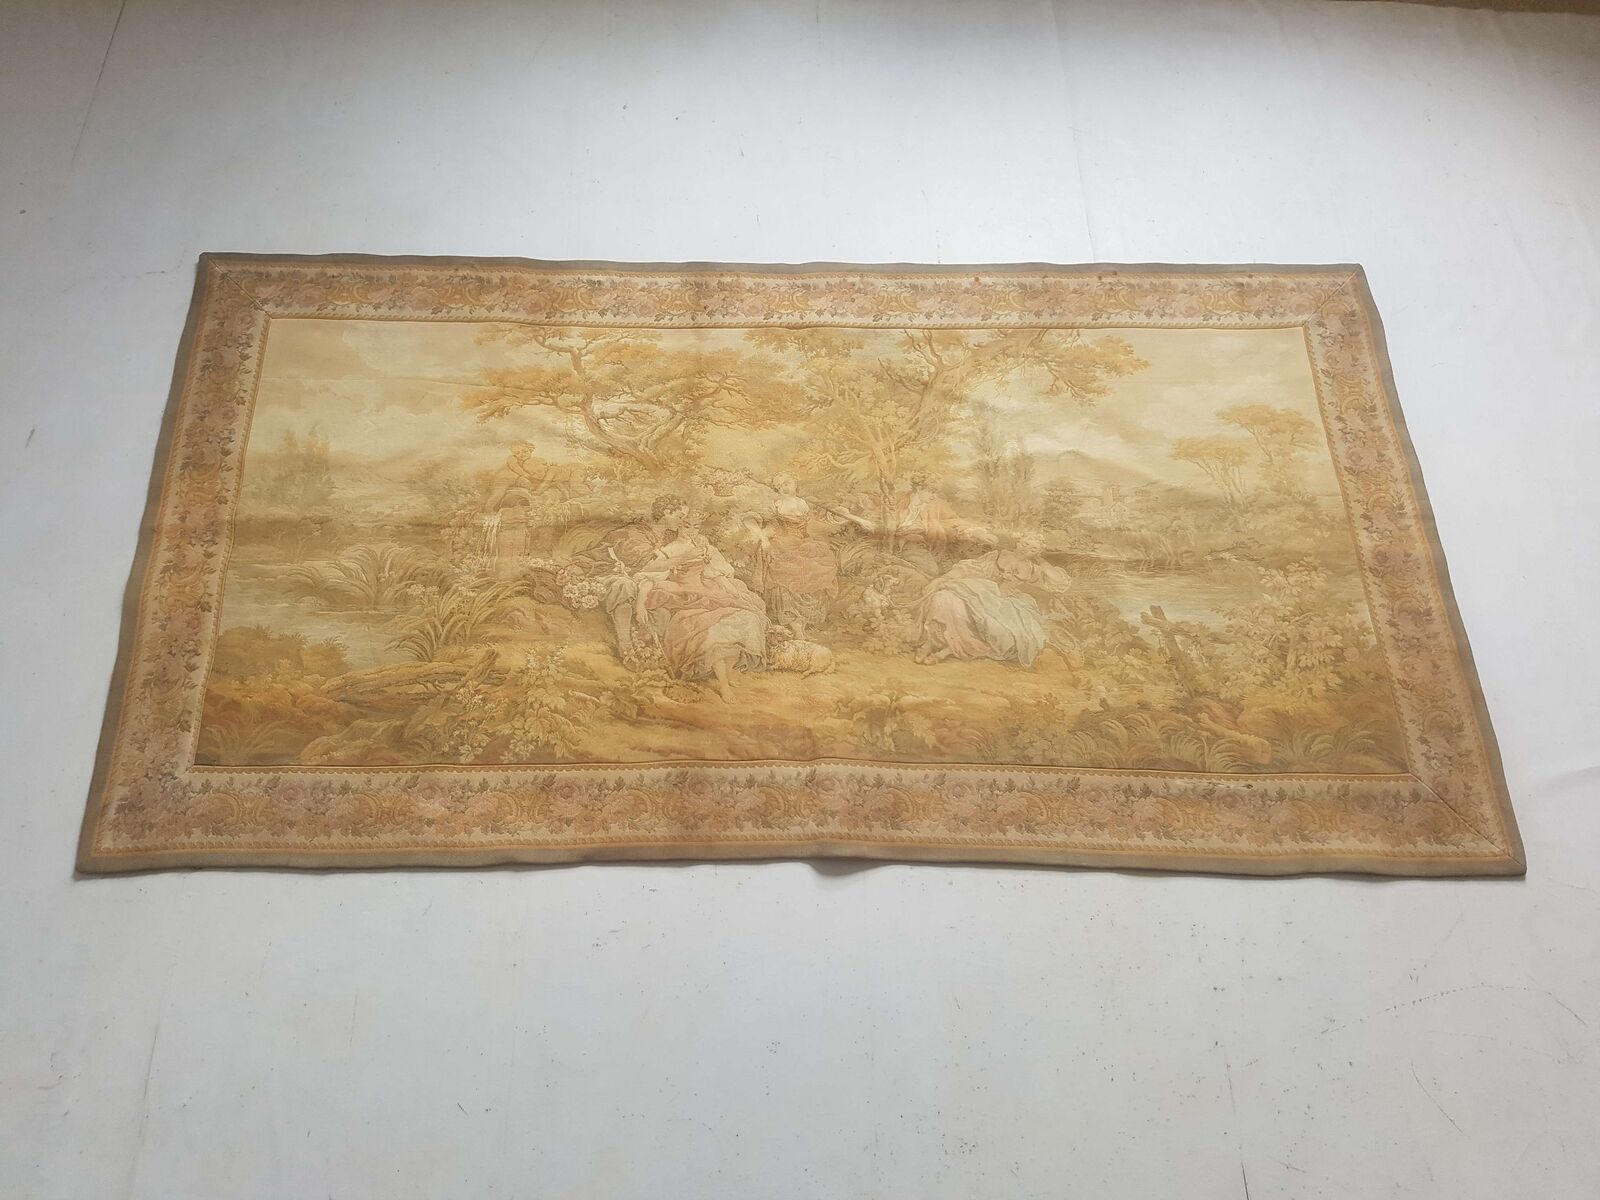 Antique JP French Couple Scene Wall Hanging Tapestry 174x93cm